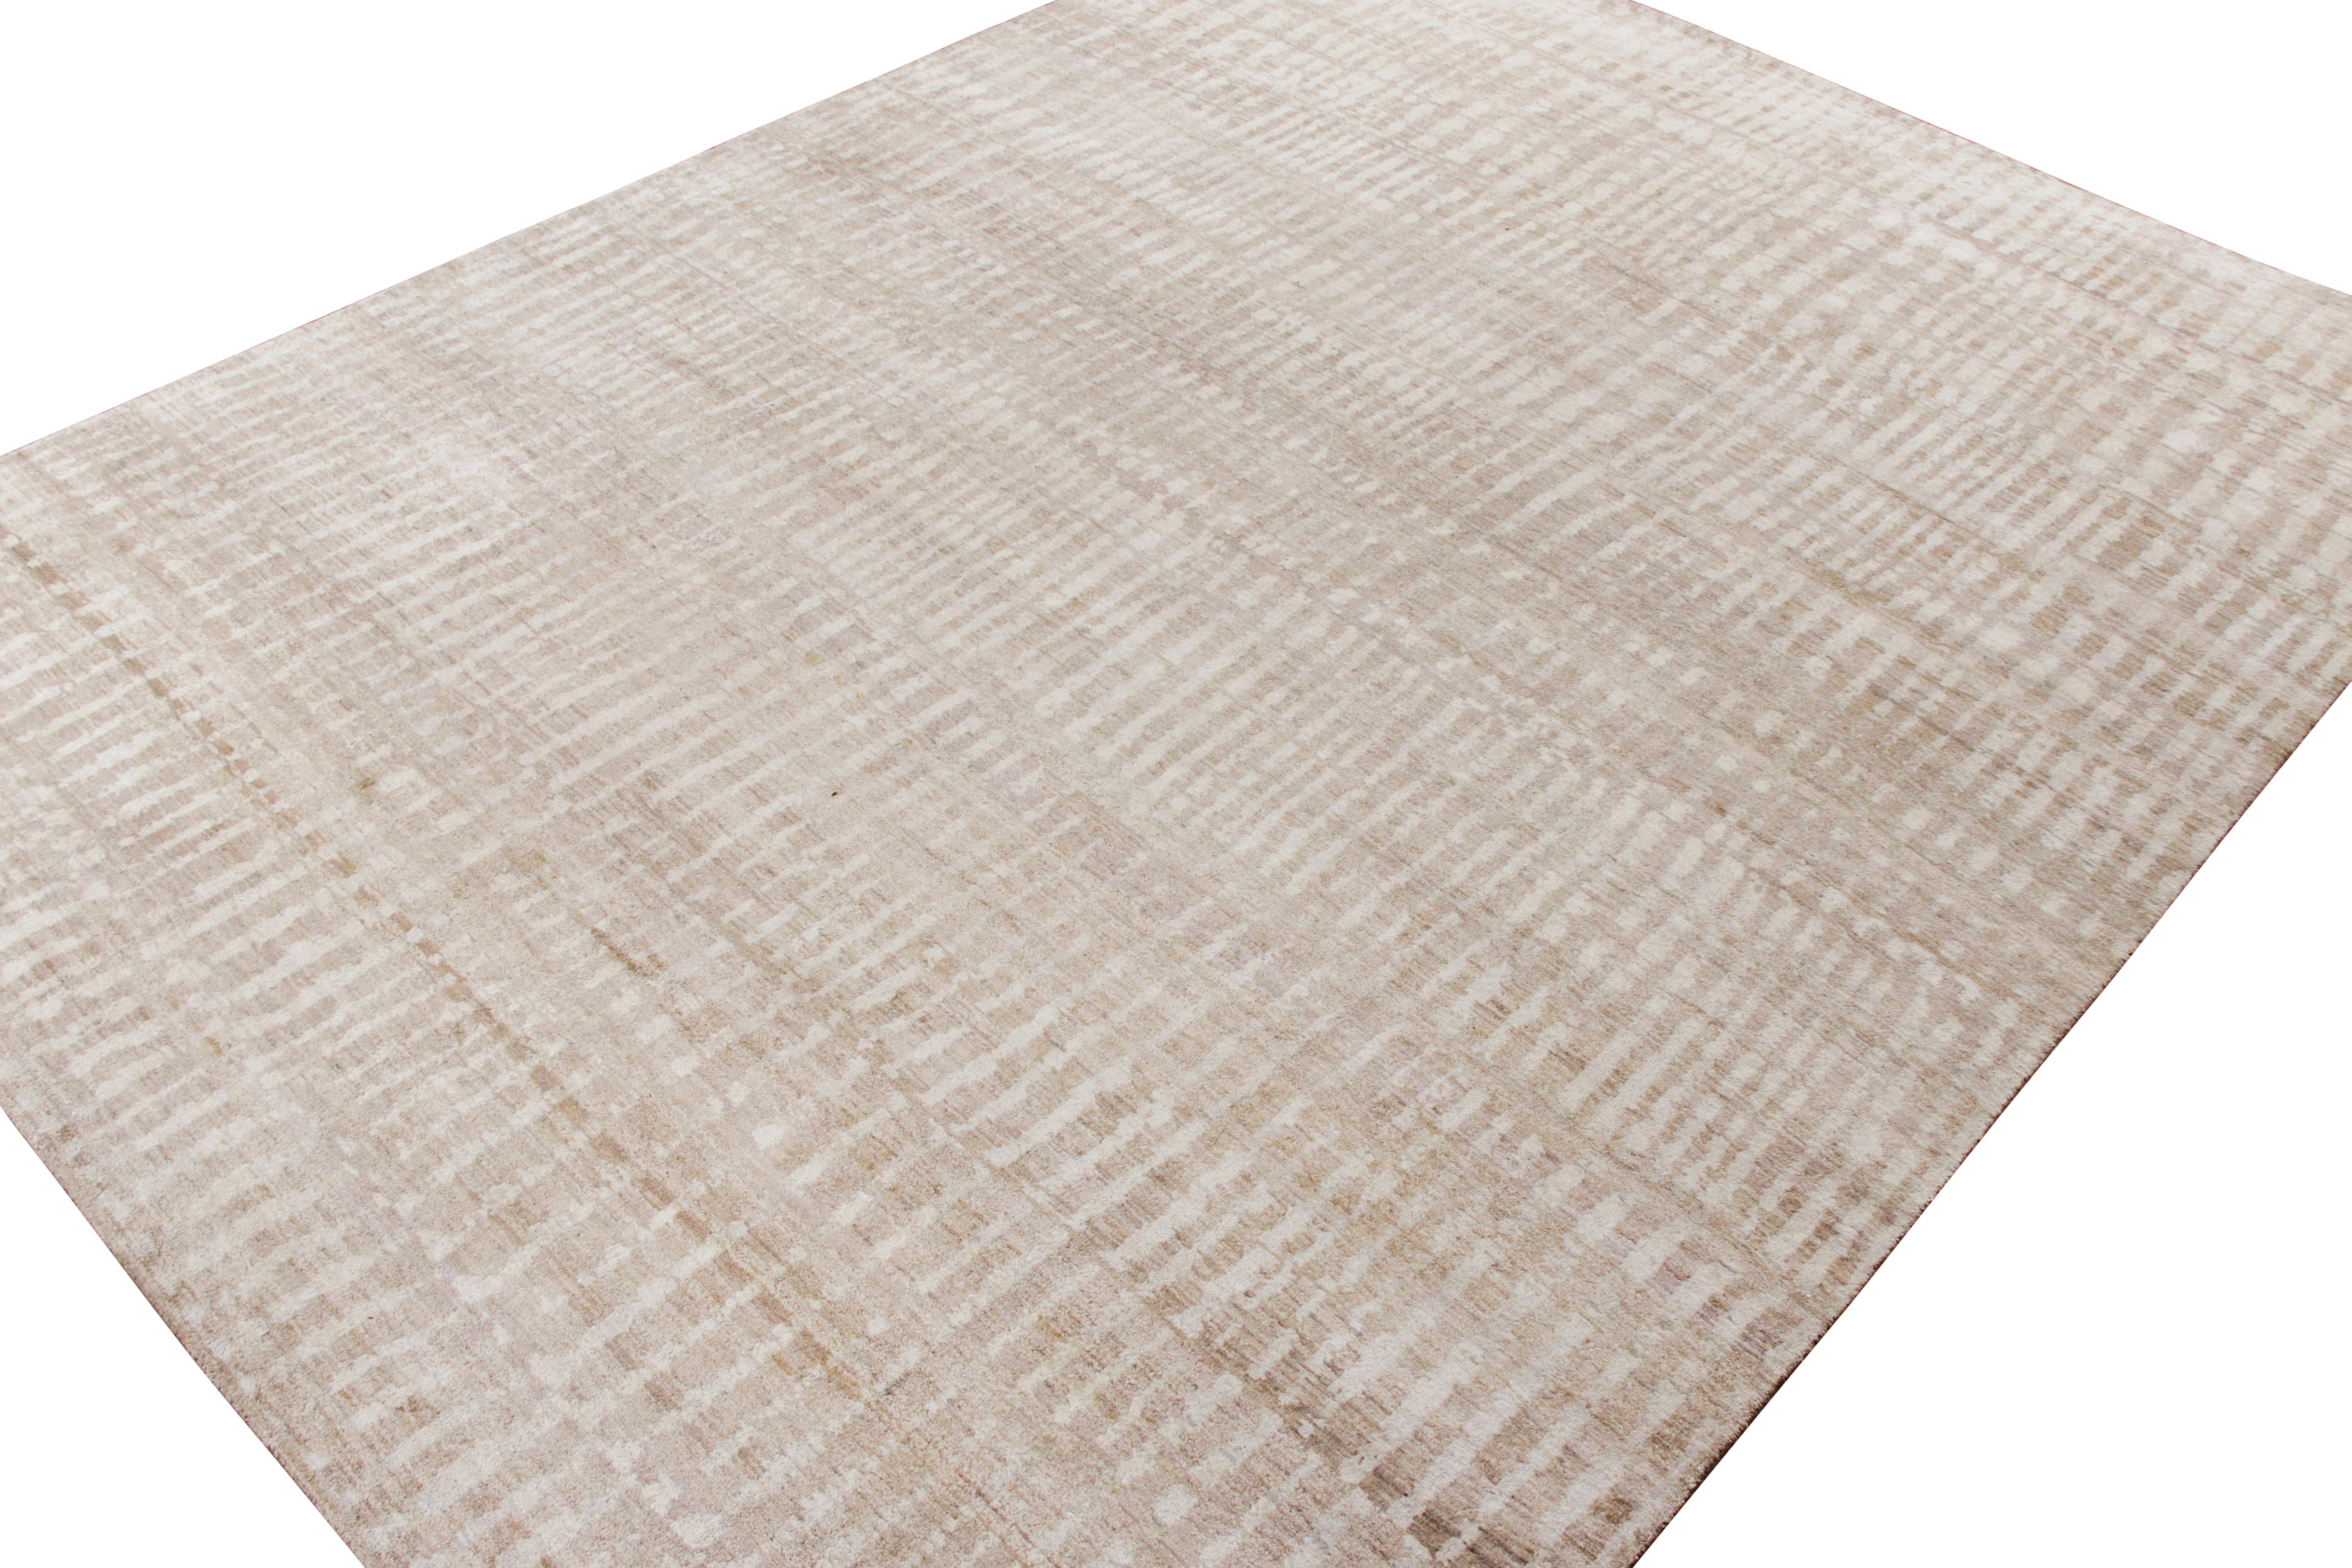 Indian Rug & Kilim’s Modern Rug in All over Beige-Brown, White Geometric Pattern For Sale